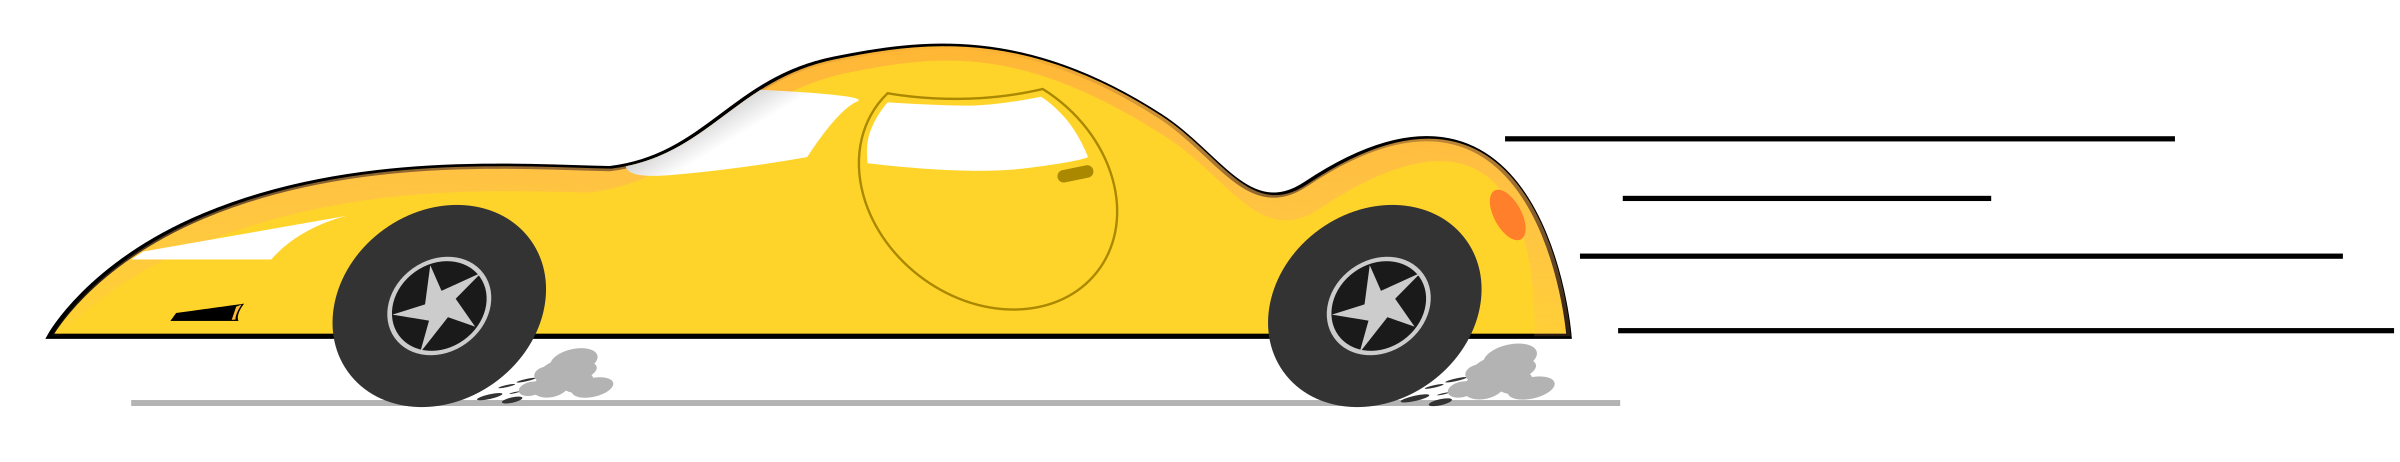 transportation clipart side view